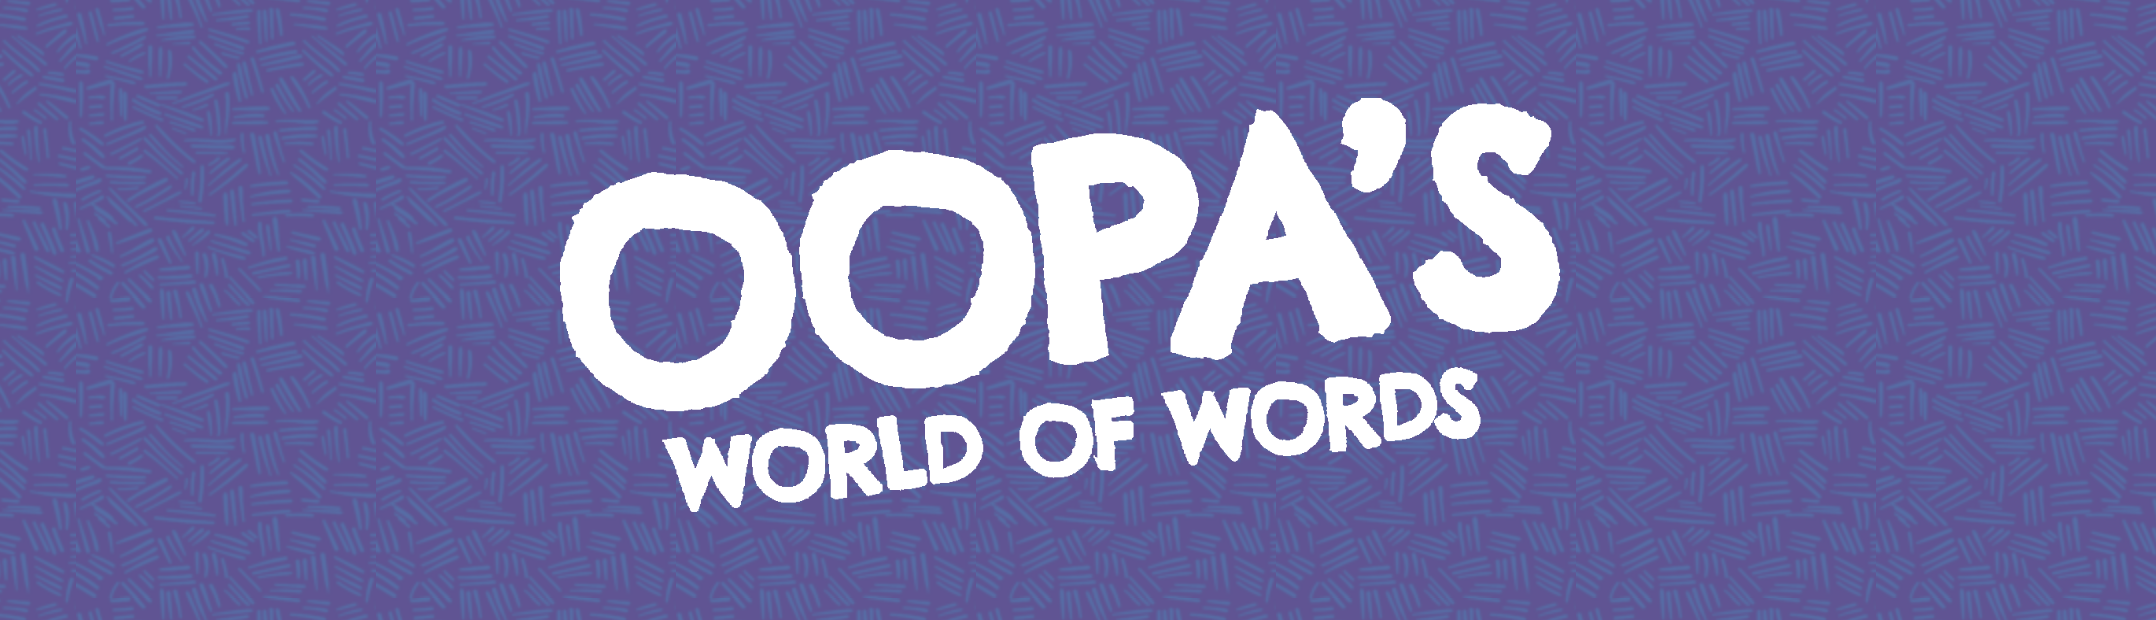 OOPAS World of Words logo